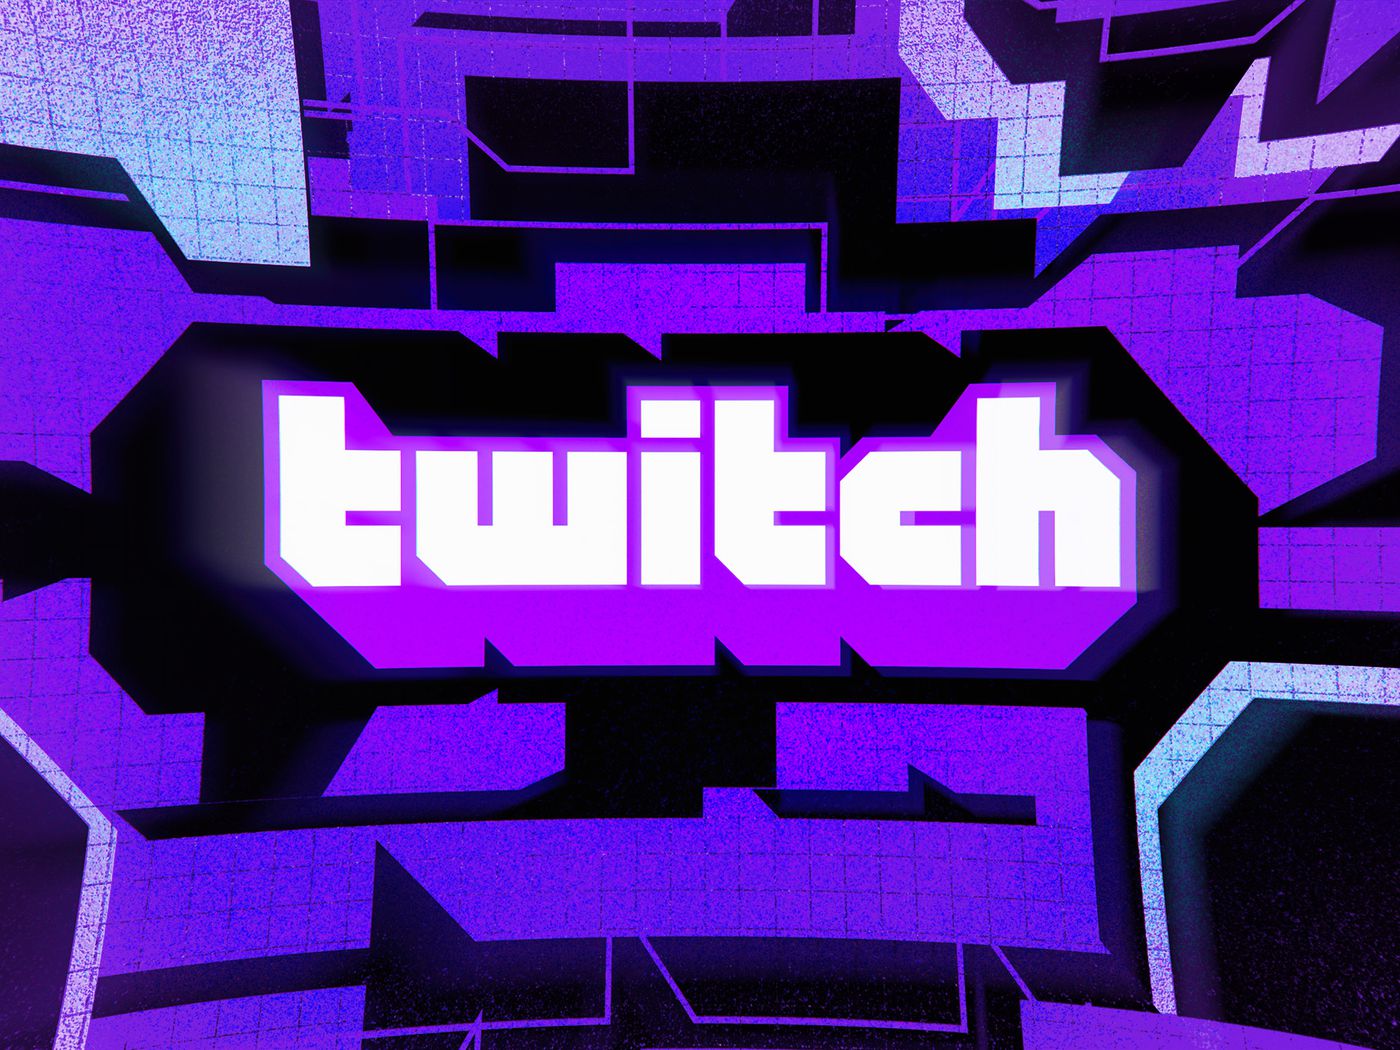 Twitch has been hacked but we will not show confidential information or links